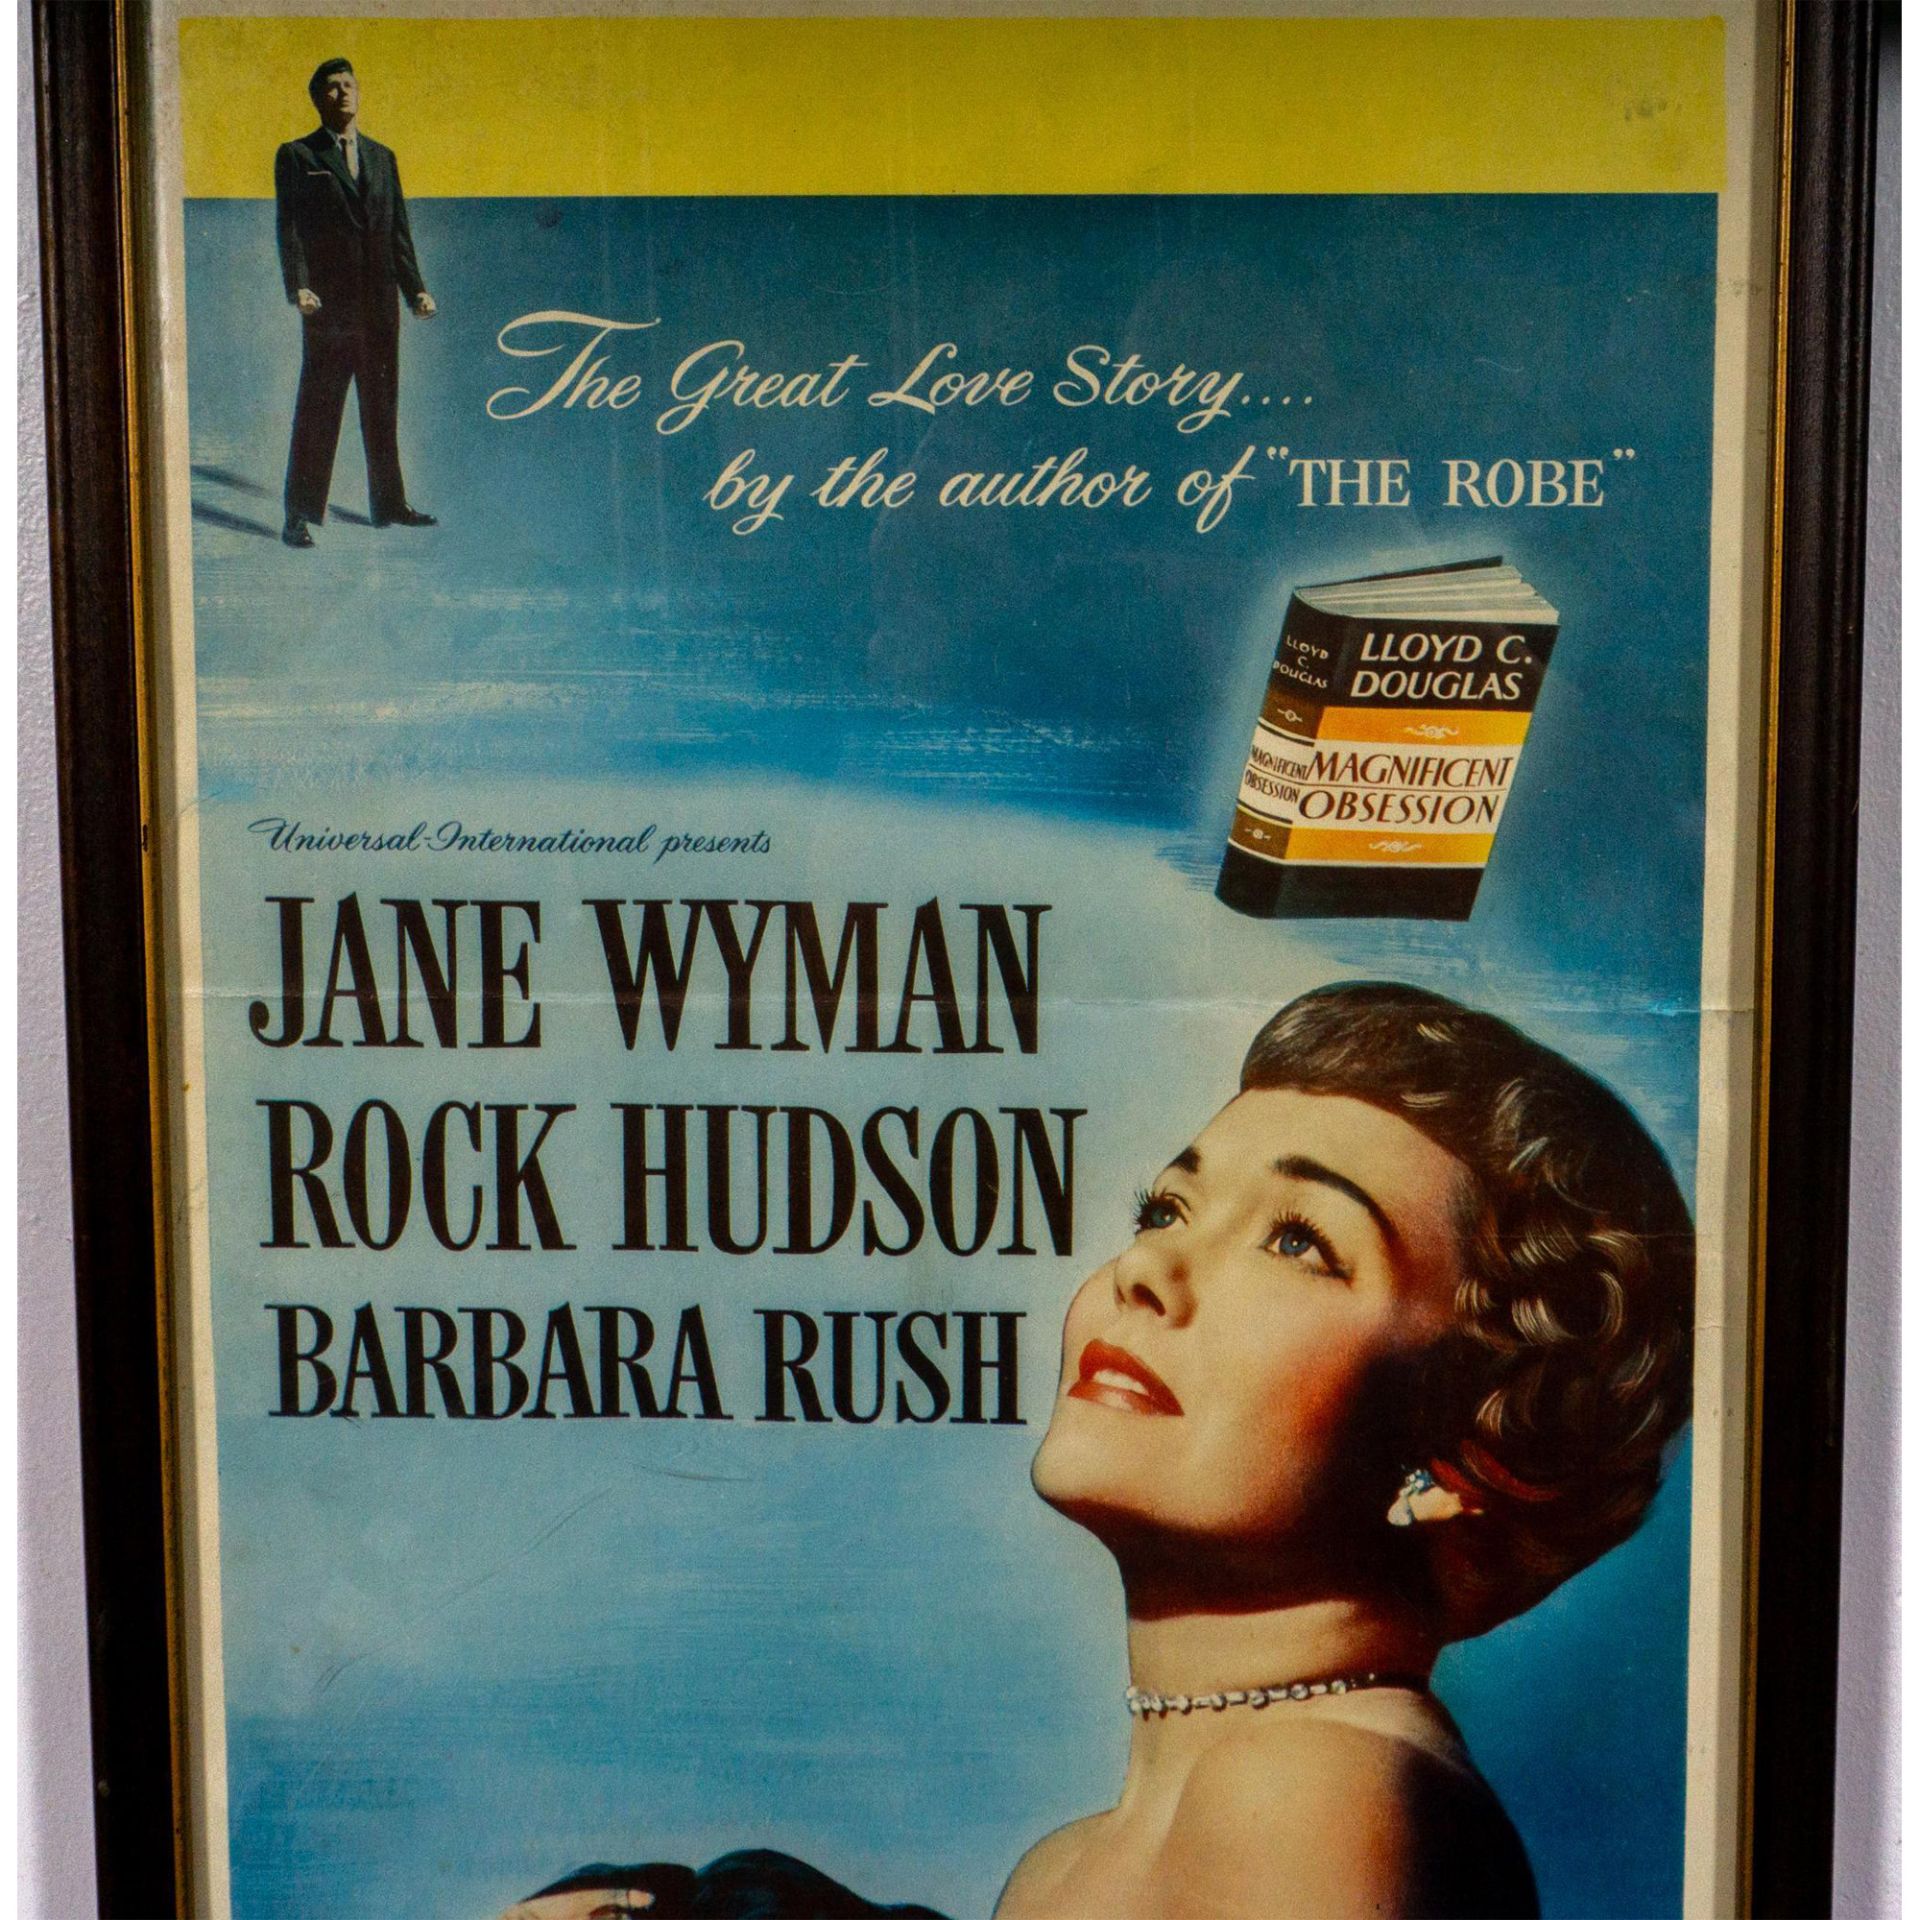 Original Movie Poster Lithograph, Magnificent Obsession - Image 4 of 5